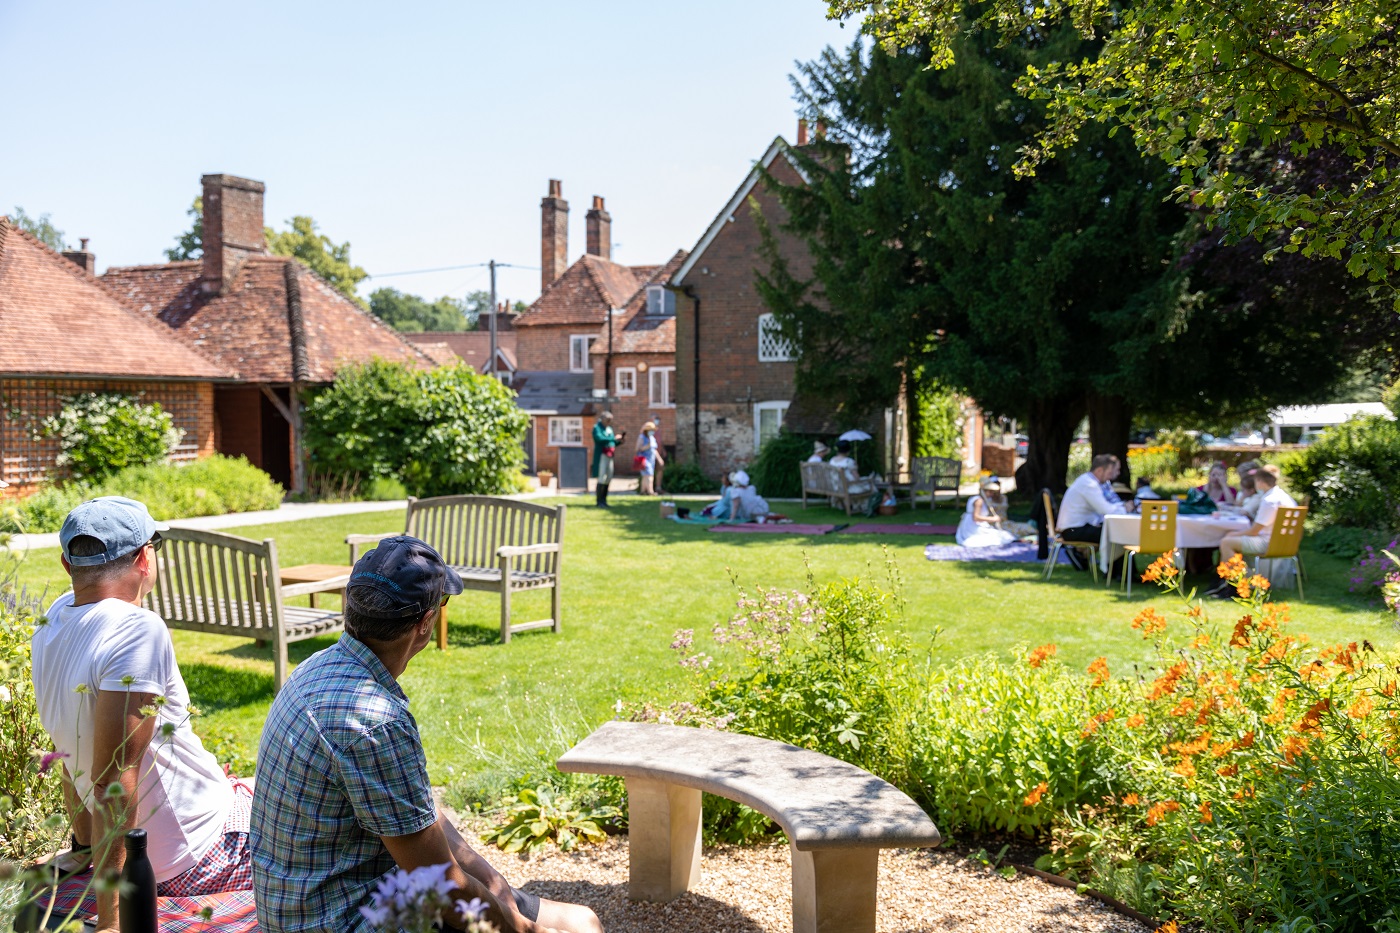 People relax in the garden at Jane Austen's House. Photo by Luke Shears